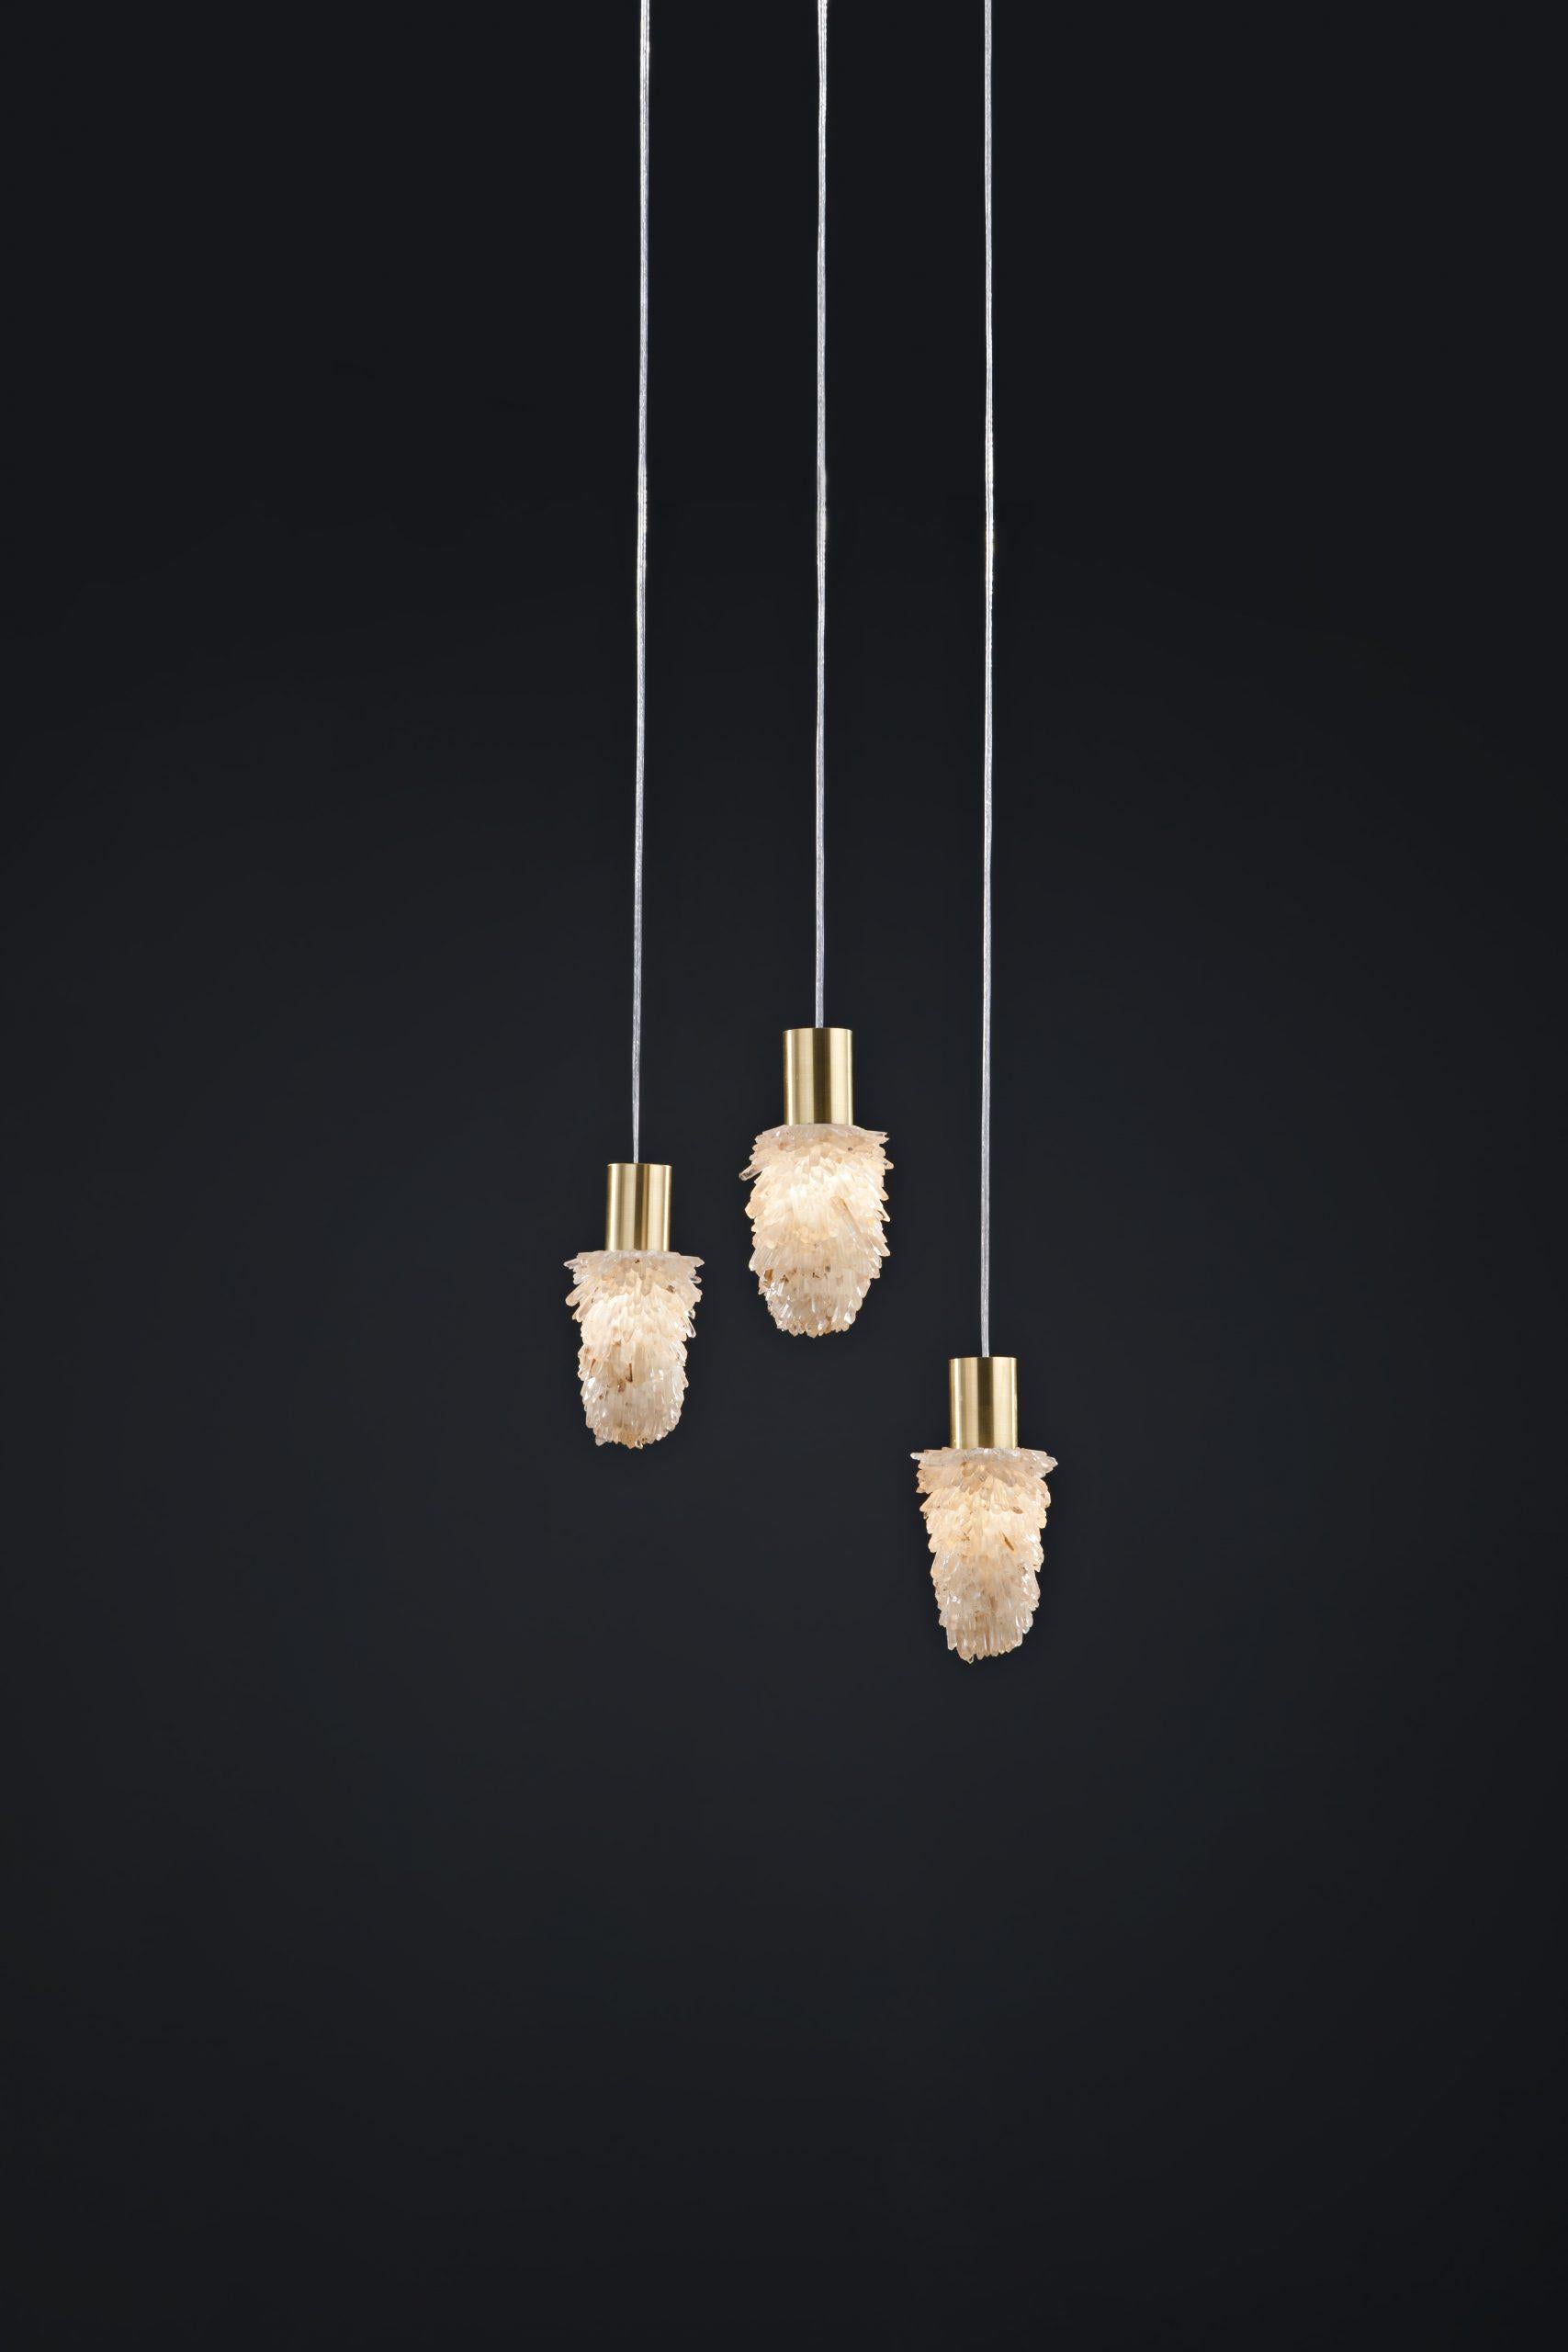 White Quartz pendant lamp By Aver
Dimensions: D 10 x W 10 x H 15 cm
Materials: White Quartz, metal.
Also Available: silver leaf, antique silver leaf, gold leaf, brass leaf, copper leaf, pink gold leaf.

All our lamps can be wired according to